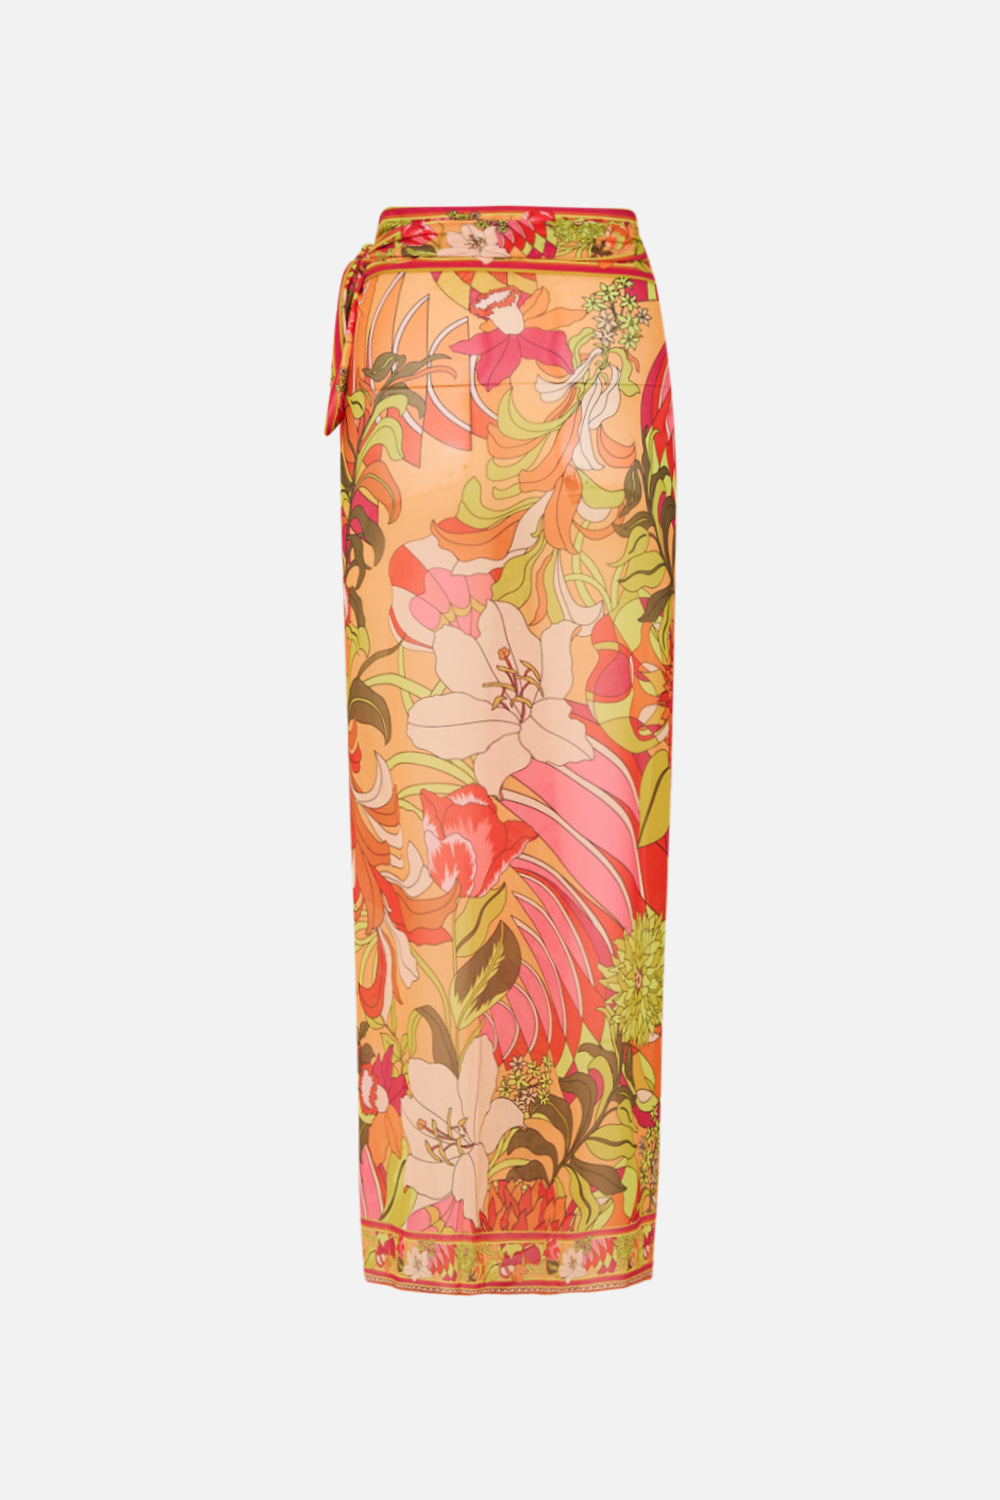 CAMILLA floral long draped sarong in The Flower Child Society